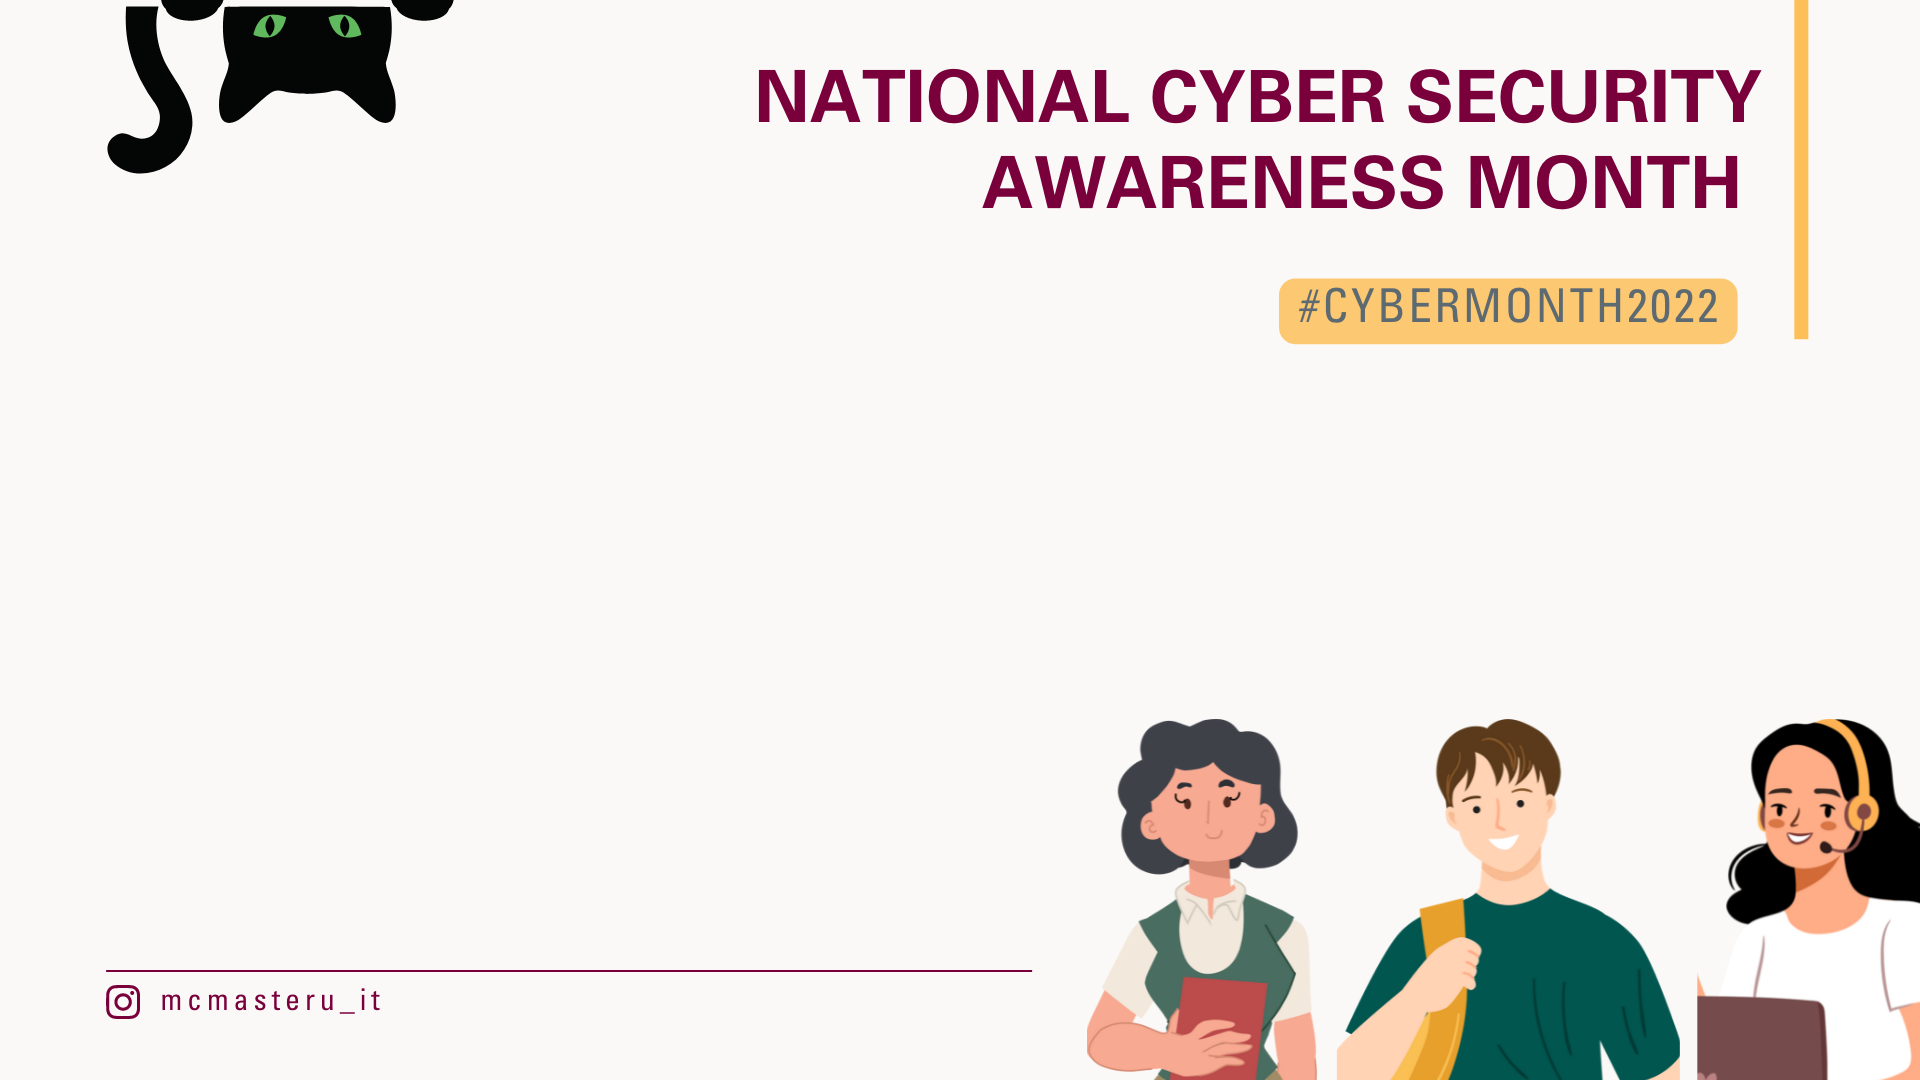 National Cyber Security Awareness Month 2022 with characters and cybercat background